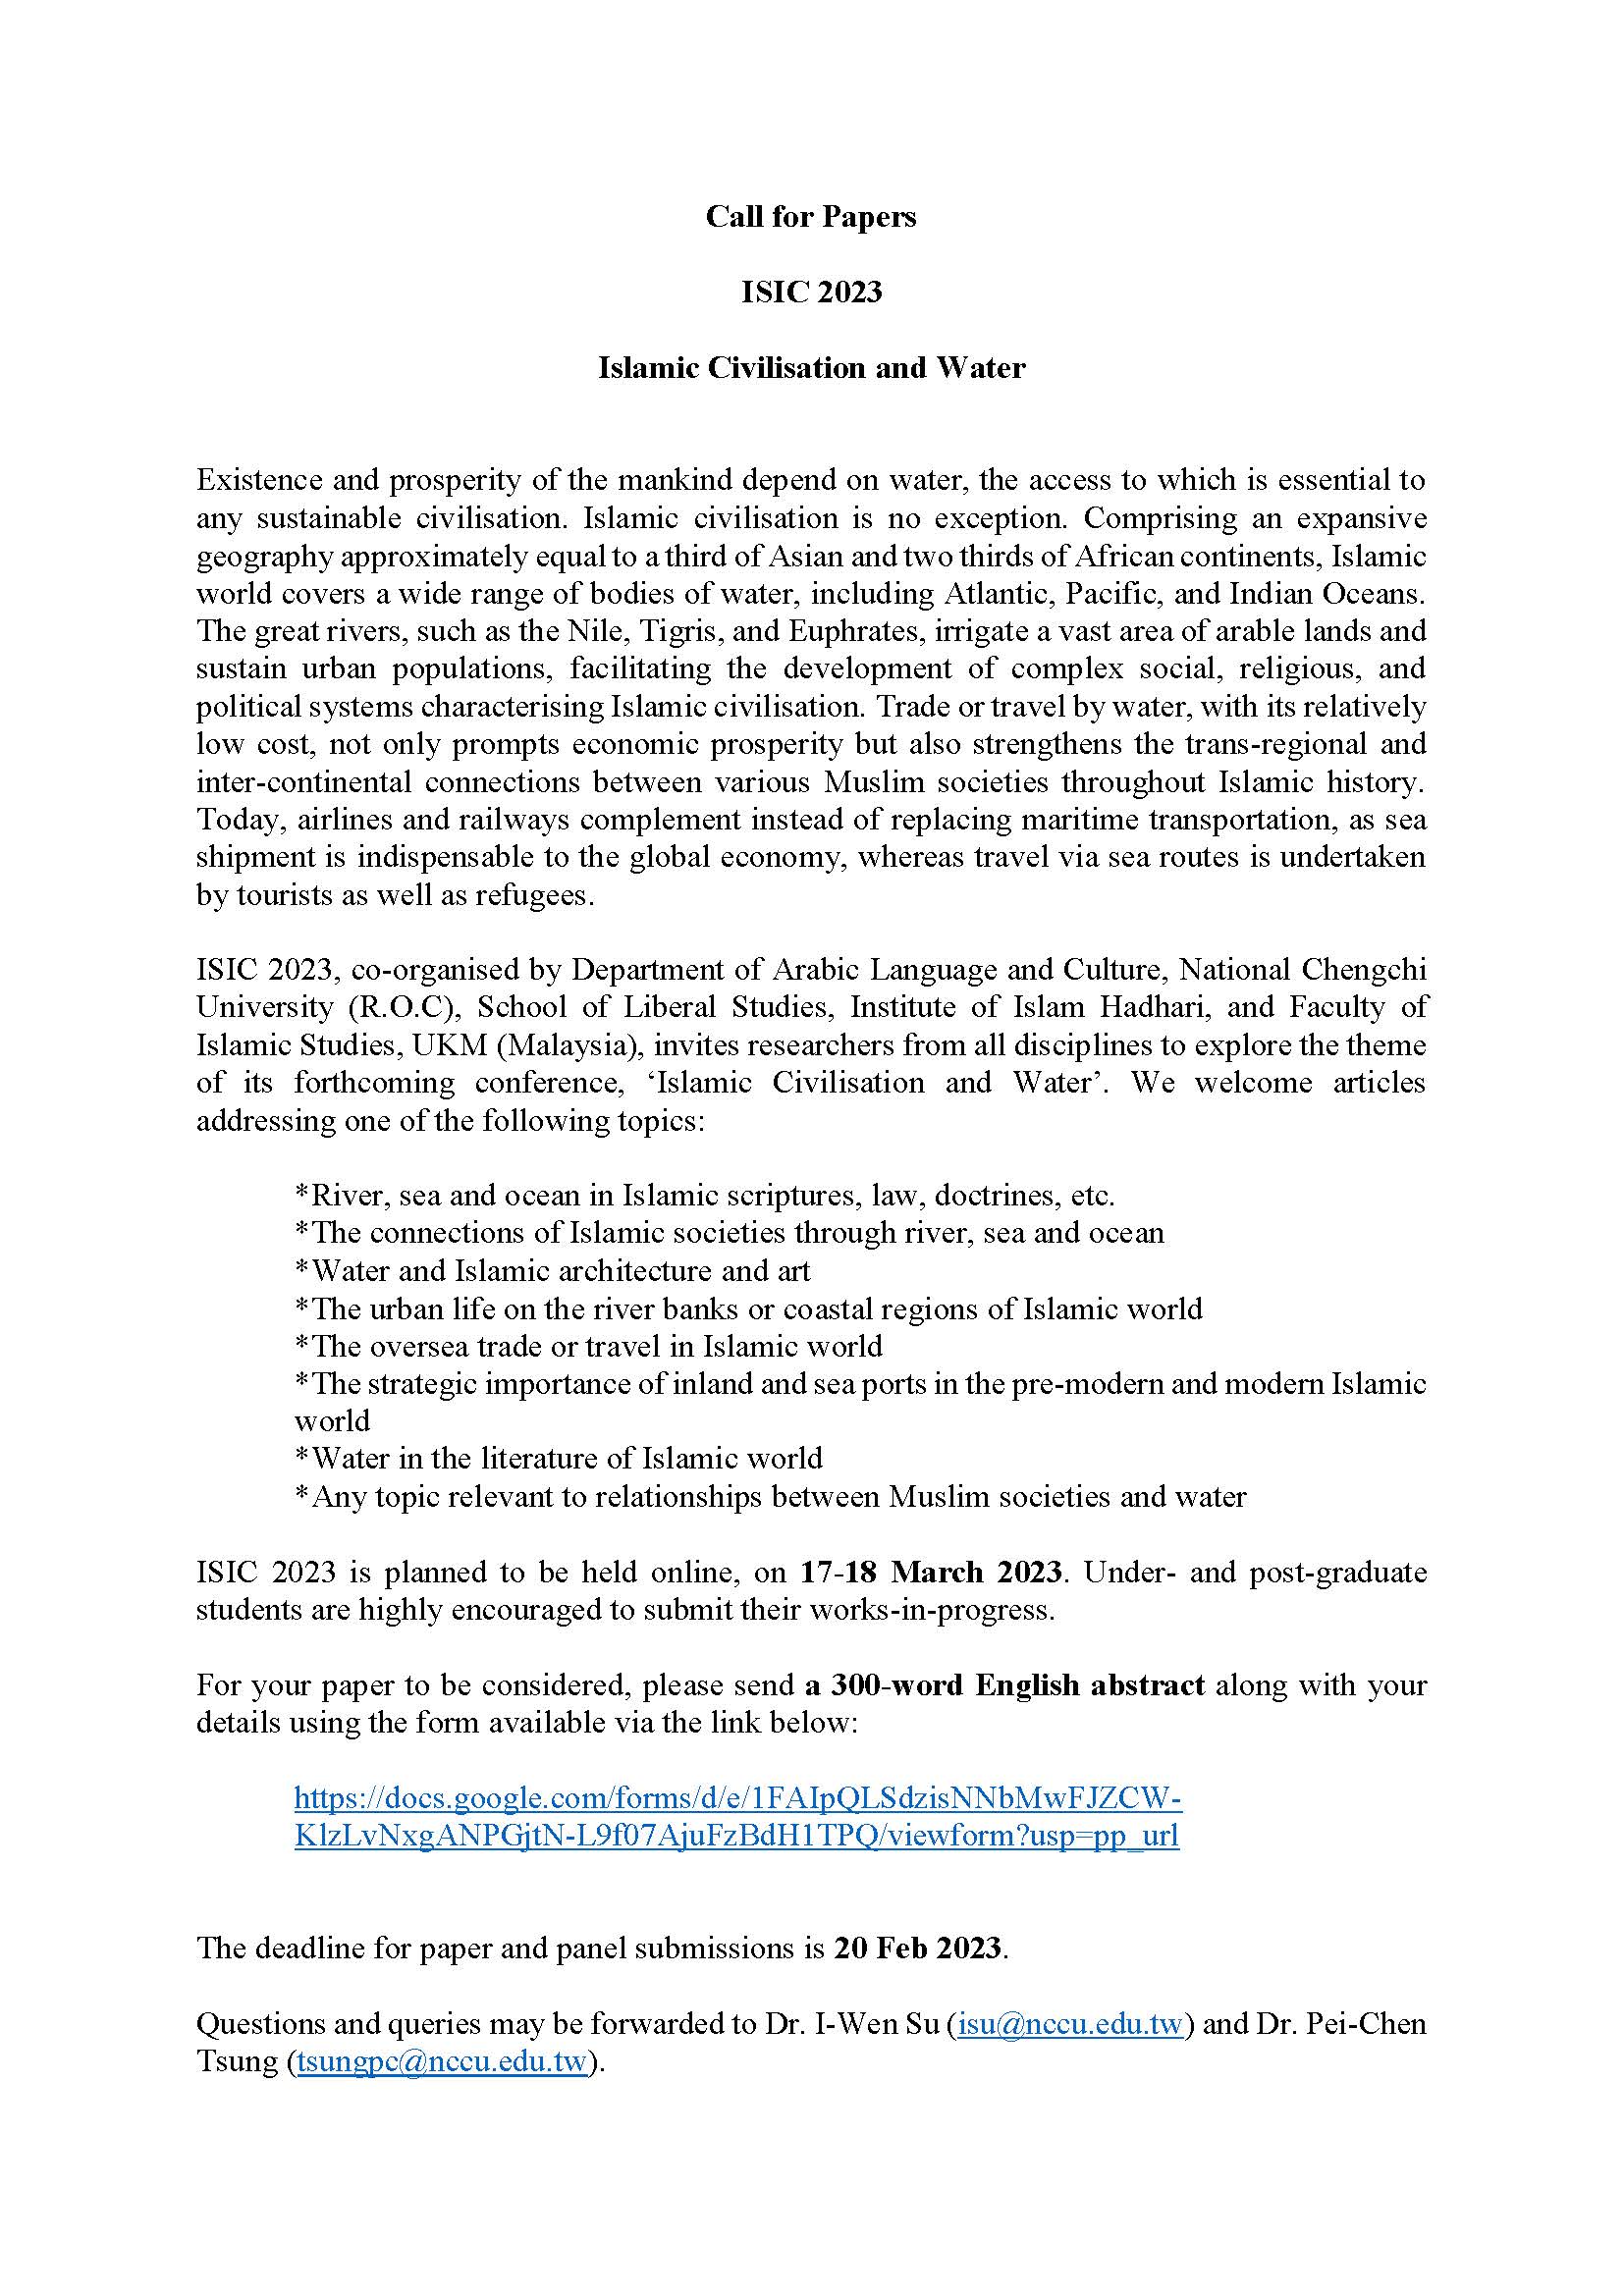 Call for Papers - ISIC 2023 